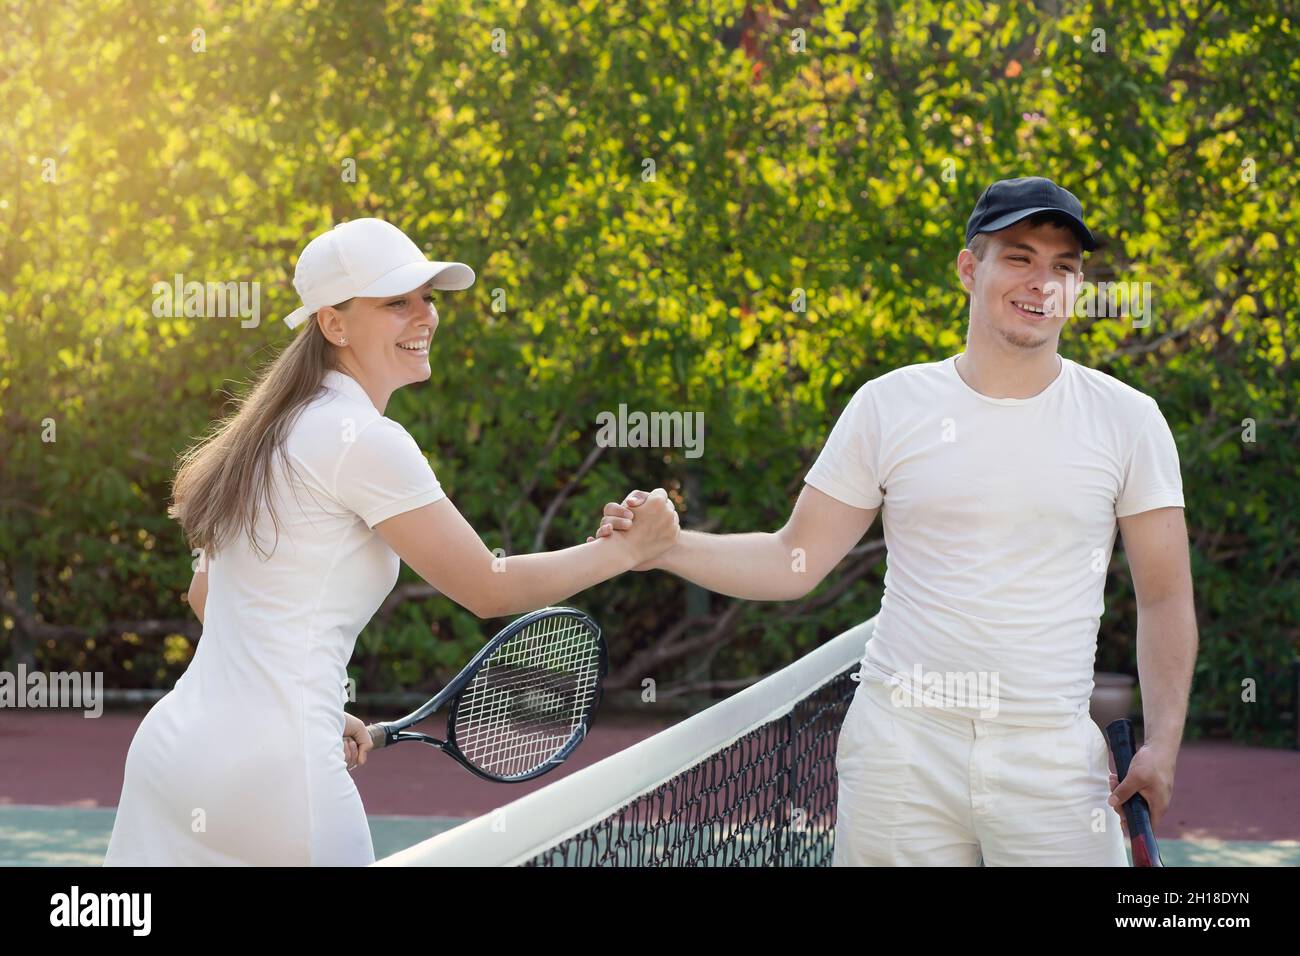 handshake after a tennis match played, a white young man and a woman. brother and sister played a game of tennis. Stock Photo